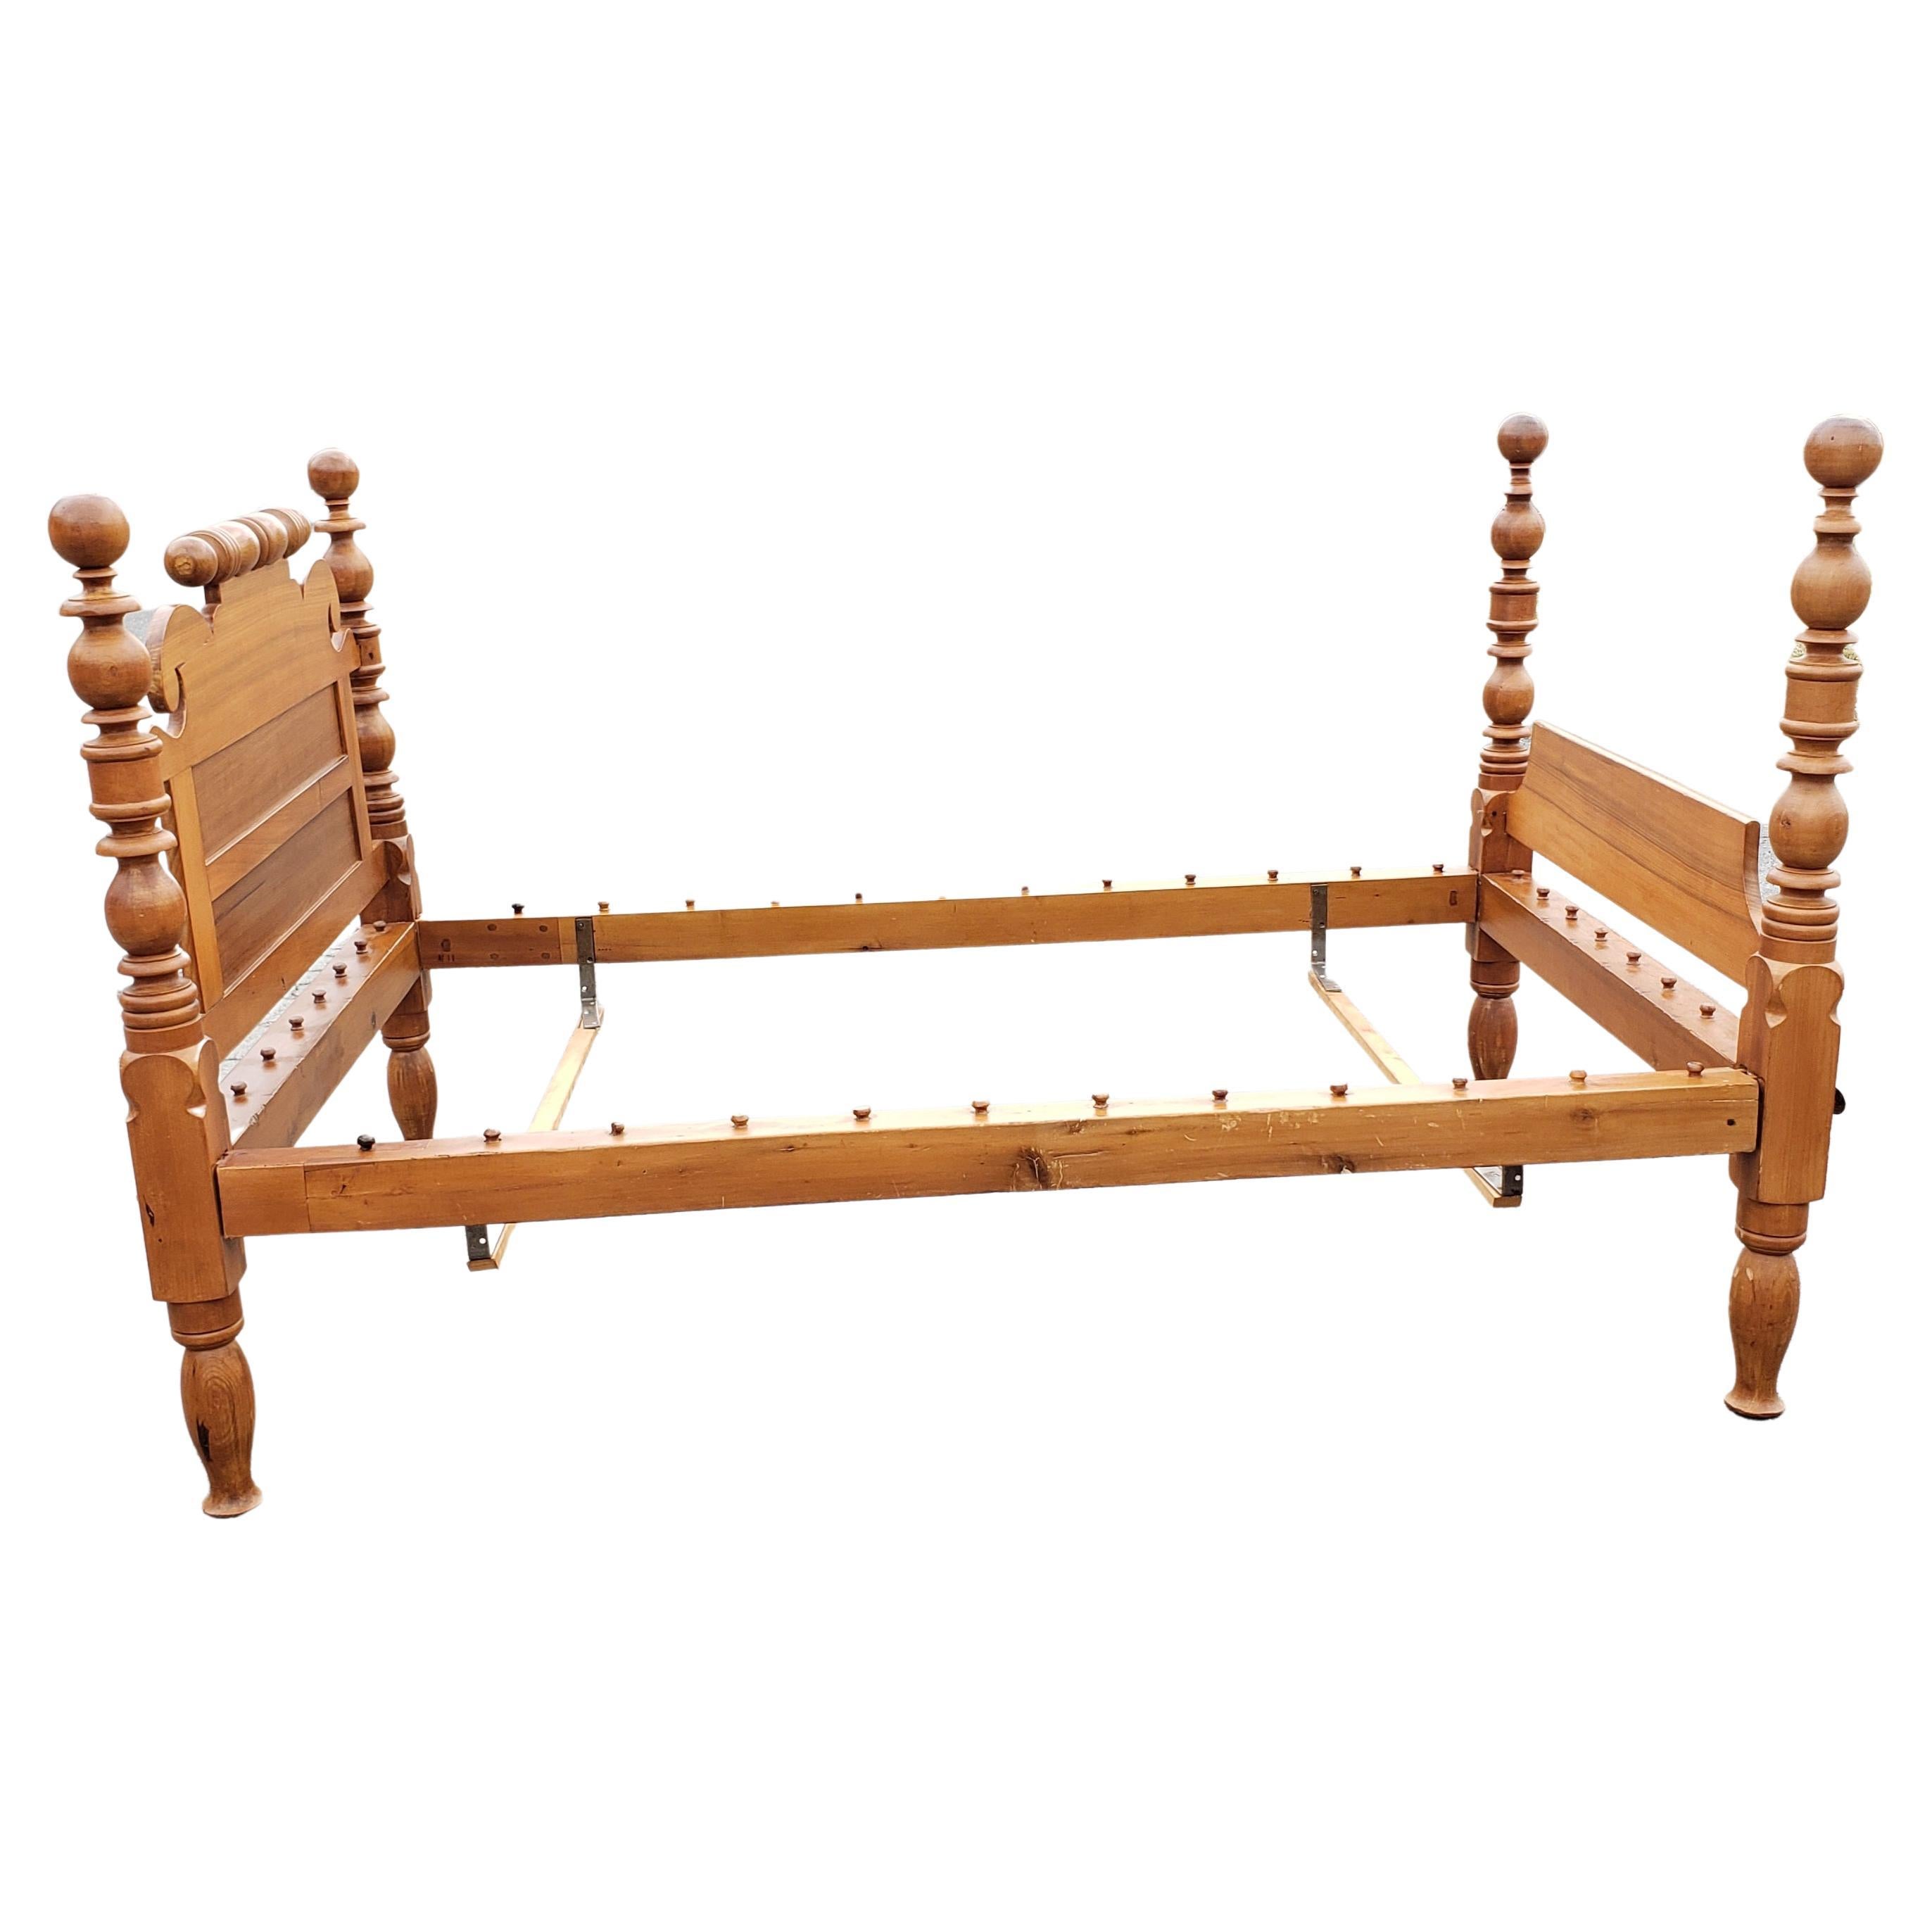 Early 1800’s Sheraton rope bed, probably Boston, with a turned posters headboard and footboard. All hand made and hand turned by a master craftsman, it has heavy solid construction. The solid maple frame has a beautiful warm patina, making it a